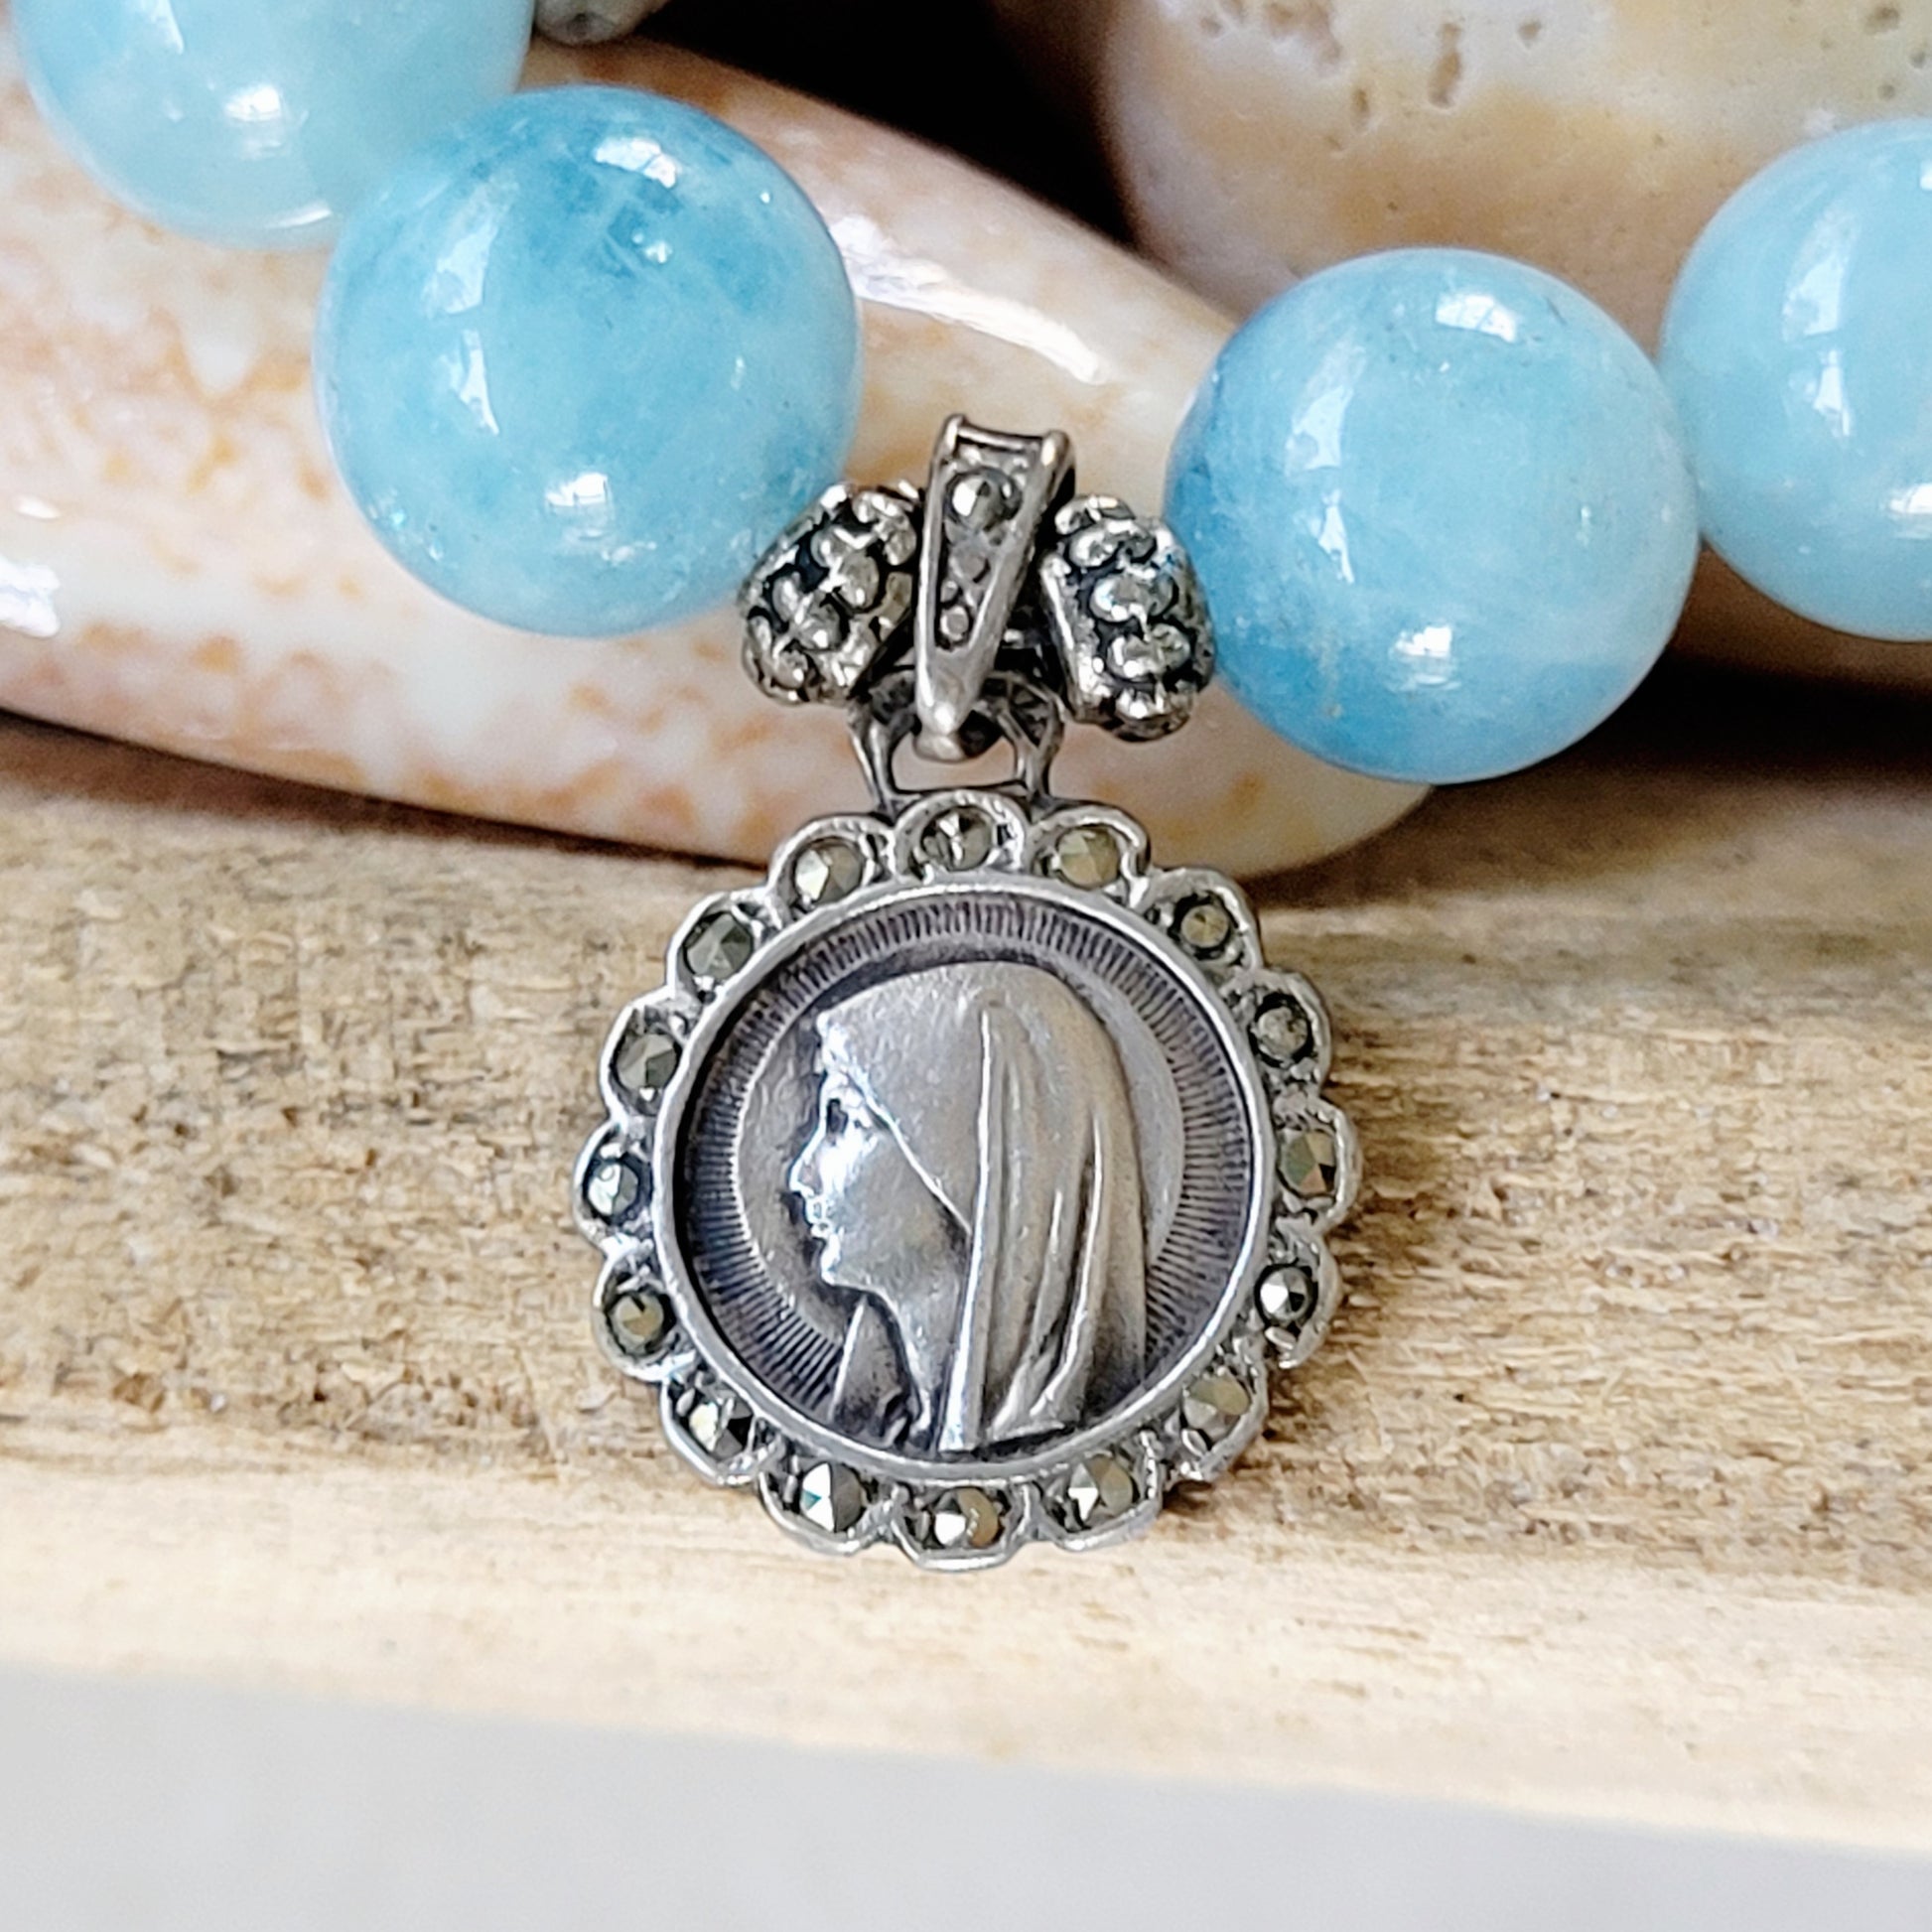 Aquamarine 12mm Beaded Bracelet w/ Sterling Silver Our Lady of Lourdes Medal with Marcasite Accent